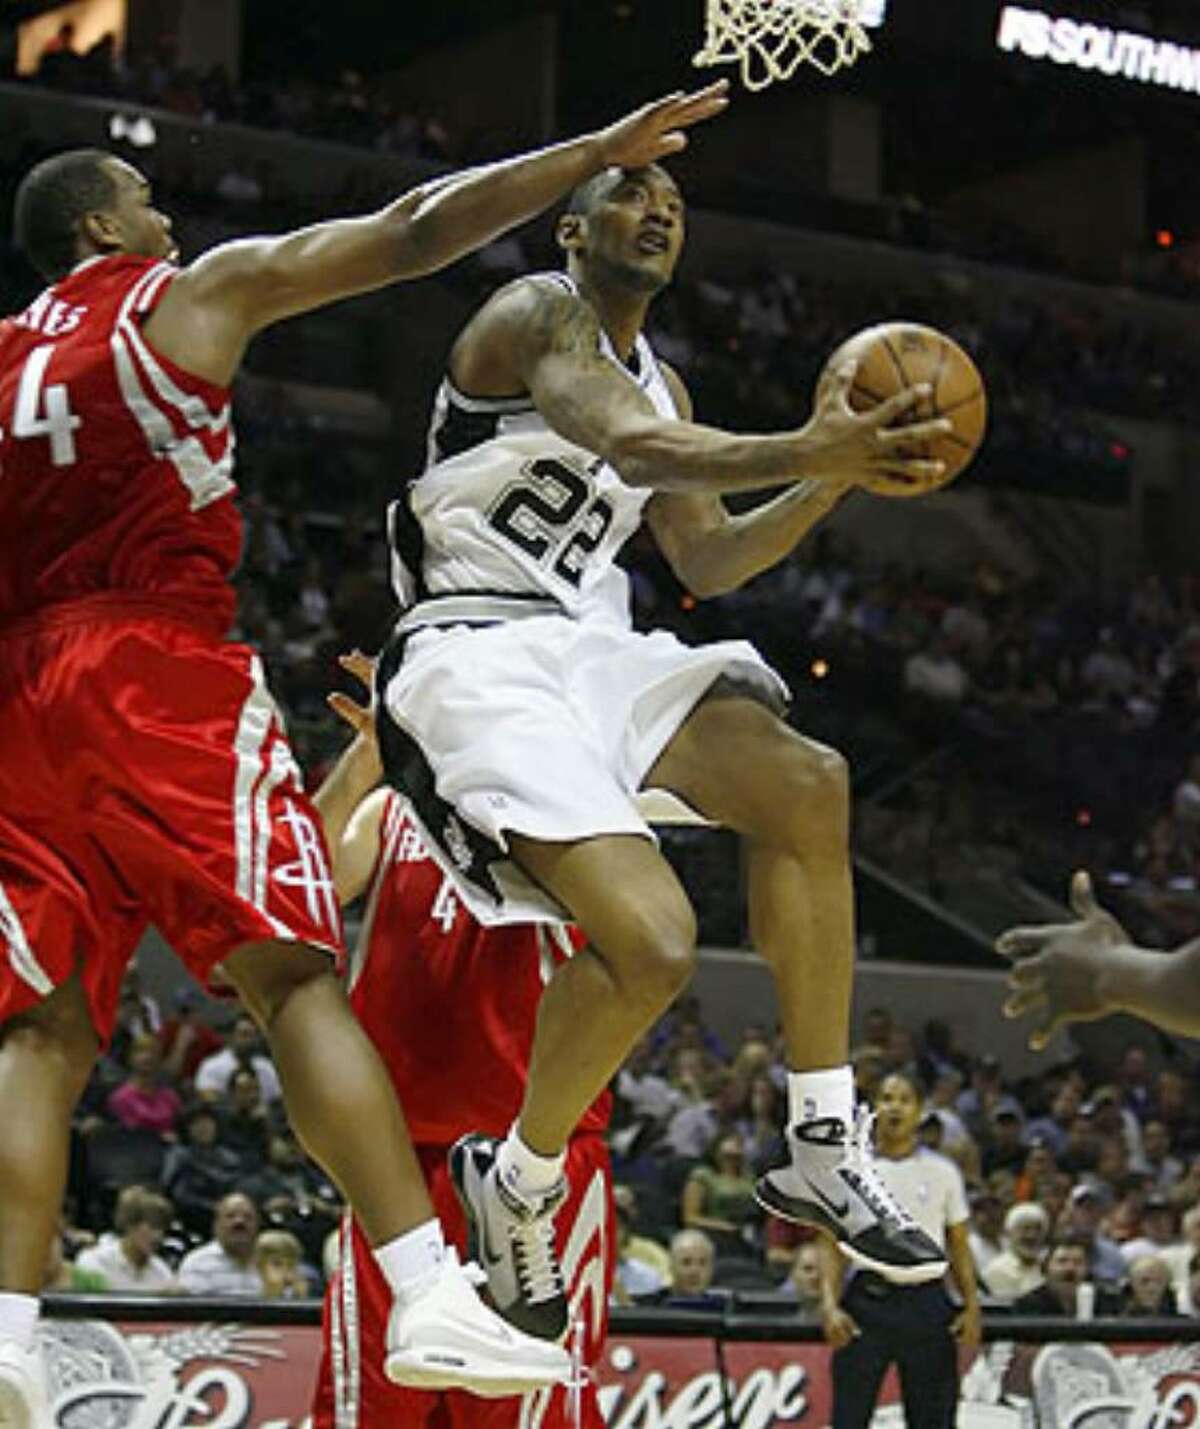 Marcus Haislip, a 6-foot-10 power forward, signed with the Spurs in July and has a guaranteed contract.